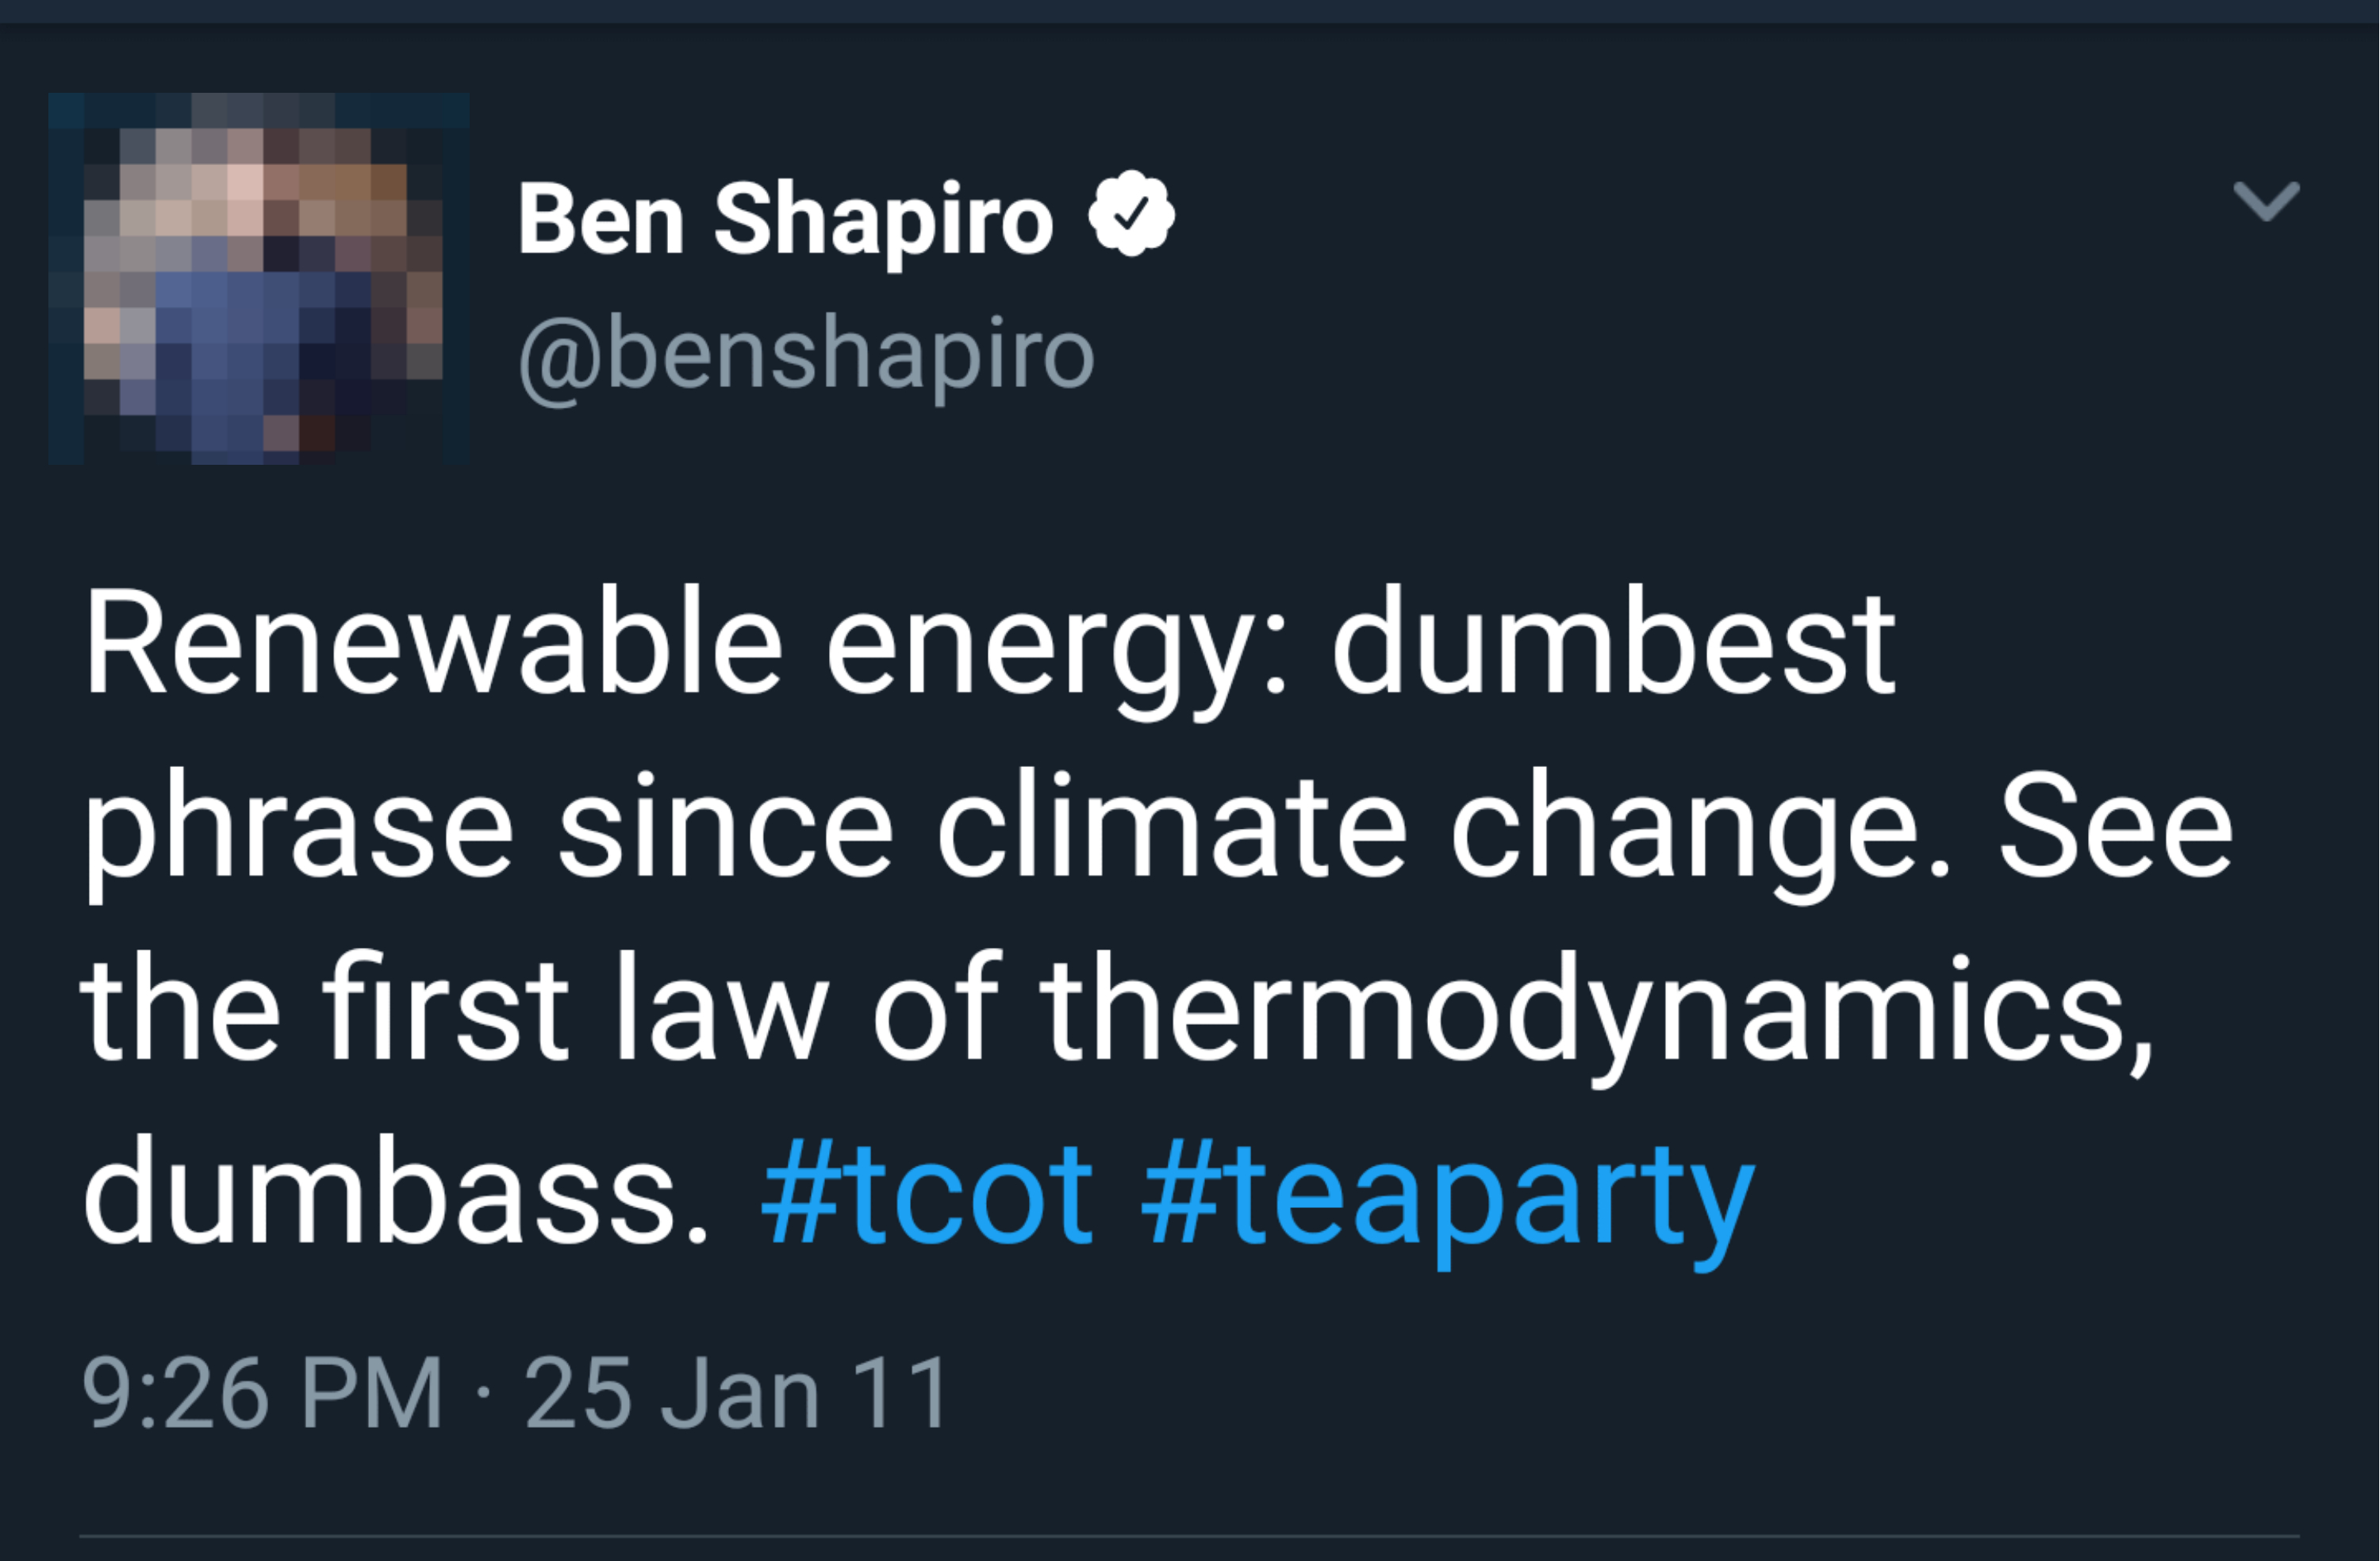 Tweet by Ben Shapiro criticizing the phrase &#x27;renewable energy&#x27; in relation to the first law of thermodynamics, with hashtags tcot and teaparty